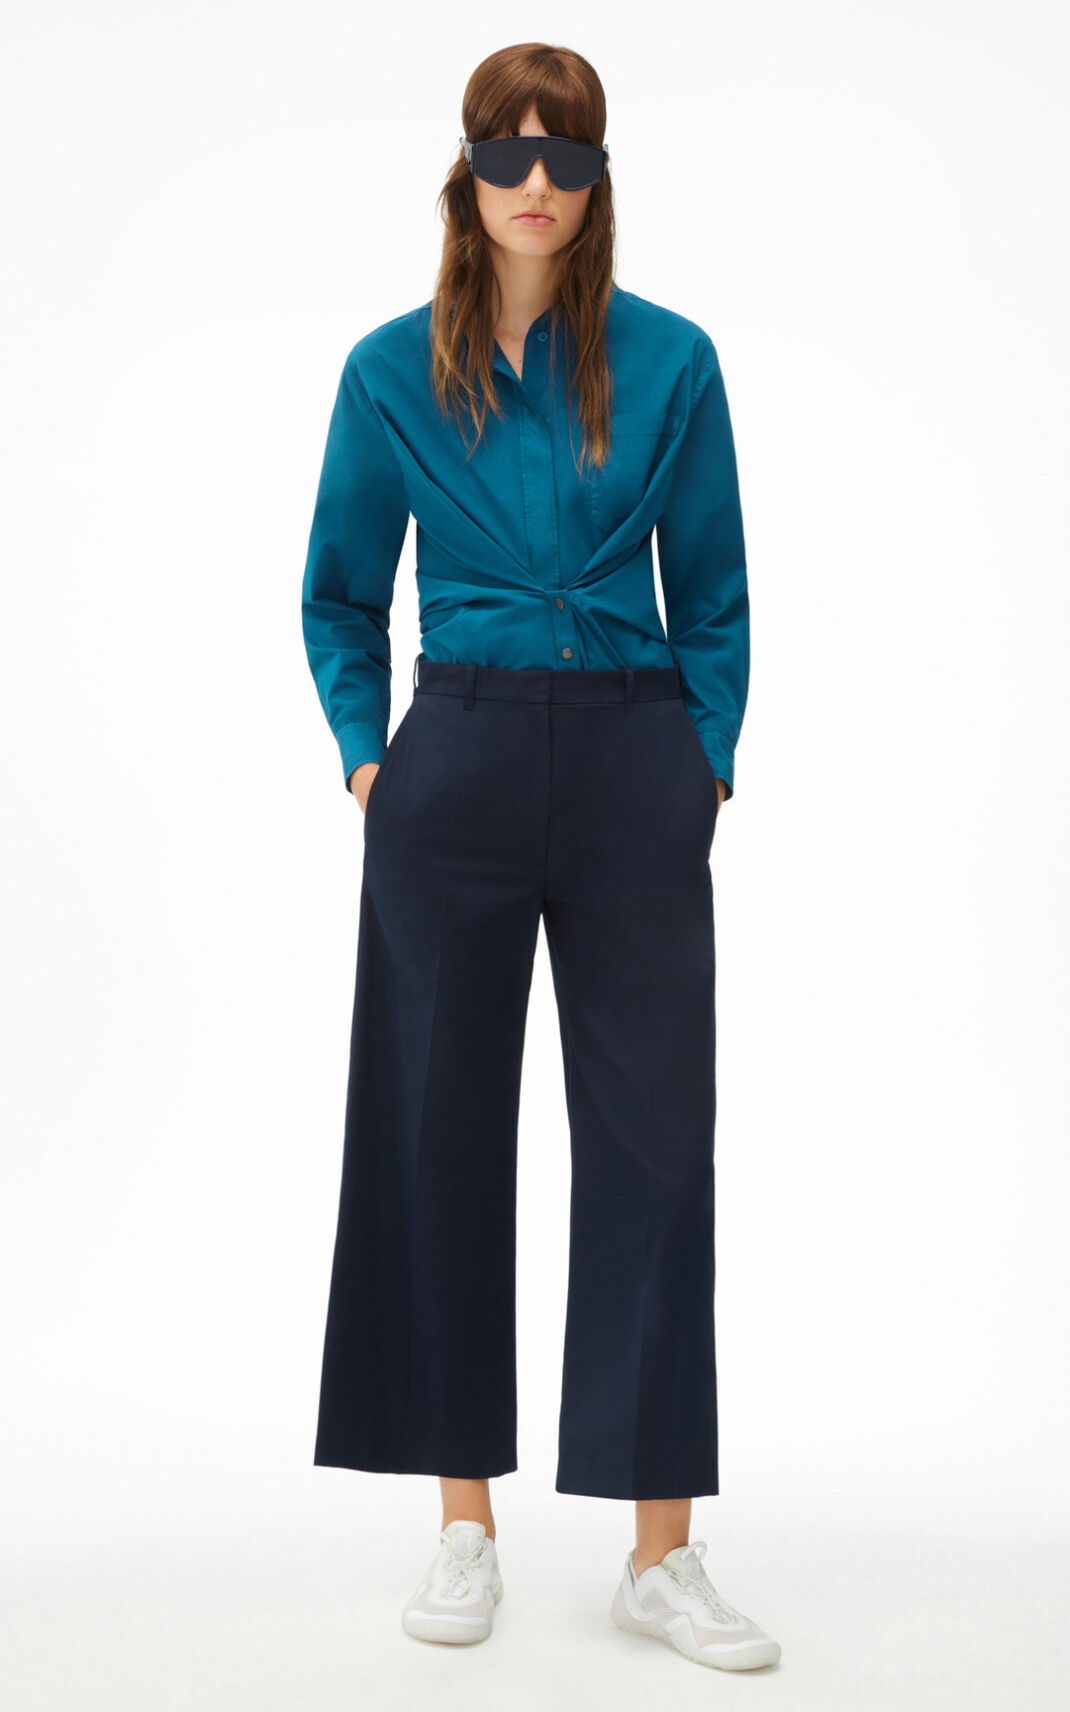 Kenzo Cropped flared Pants Blue Black For Womens 4738CIBPT